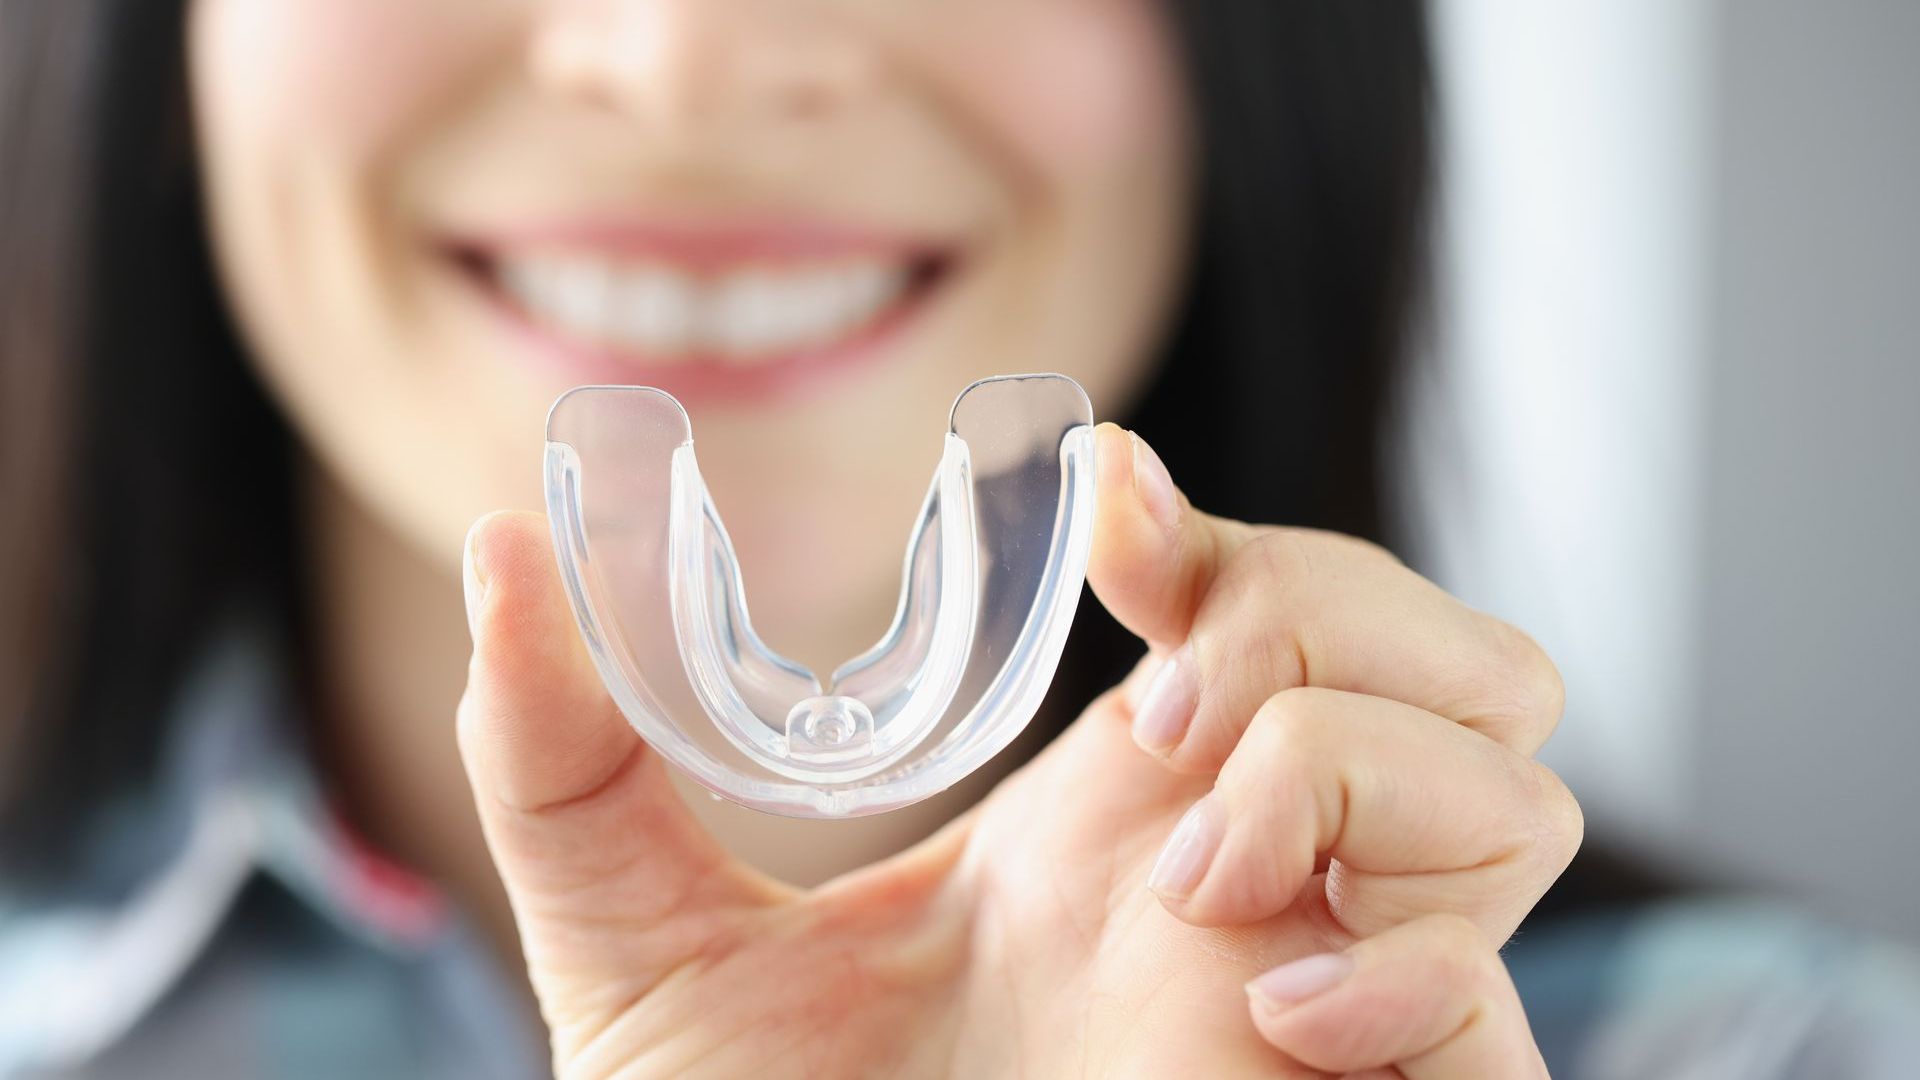 A woman is holding a clear mouth guard in her hand.